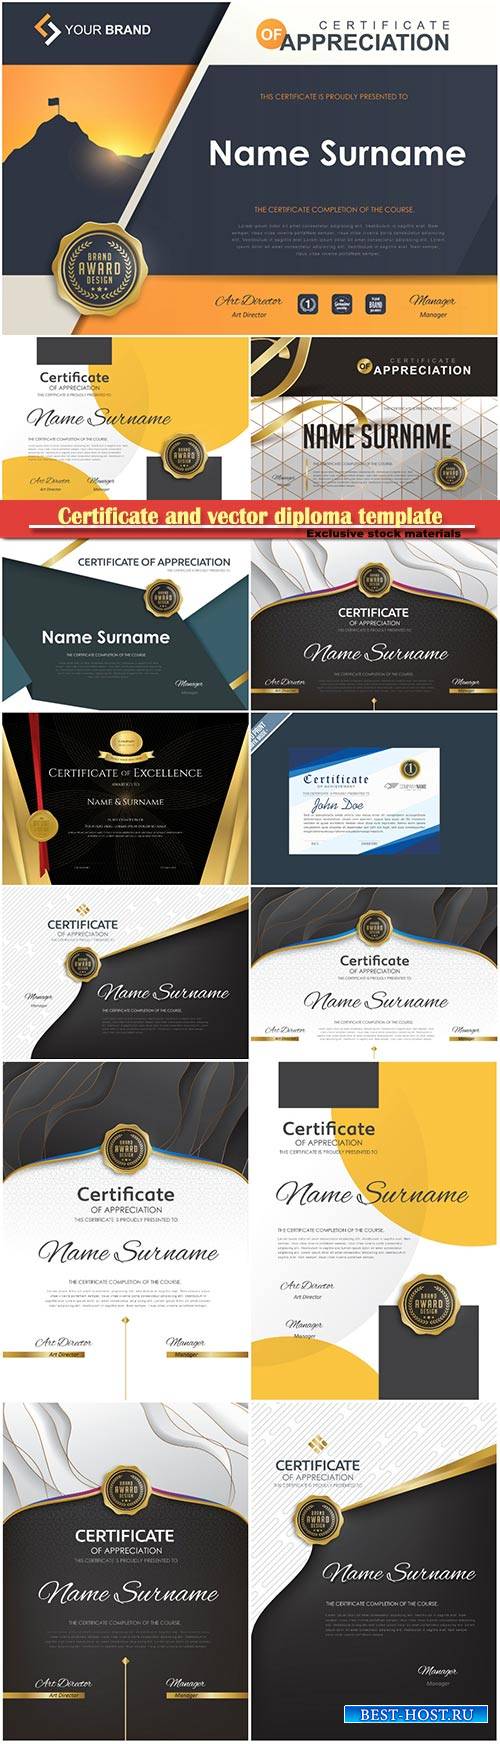 Certificate and vector diploma template design set